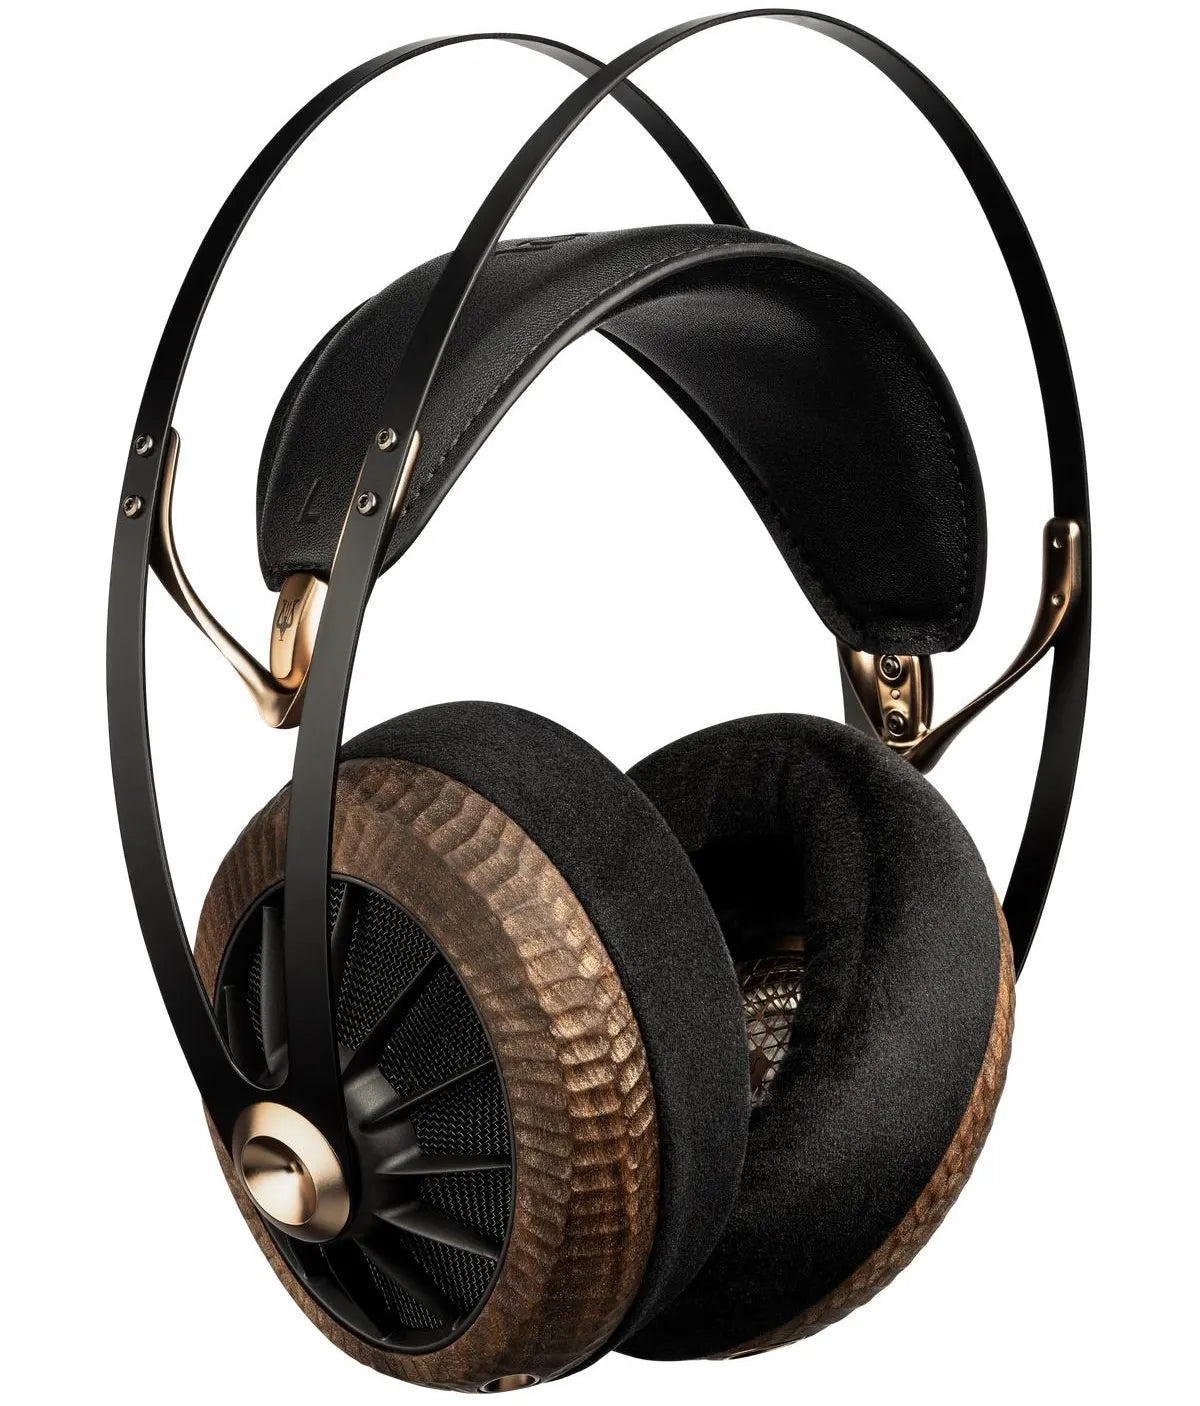 Meze 109 PRO Primal special edition headphones (LIMITED STOCK NOW)